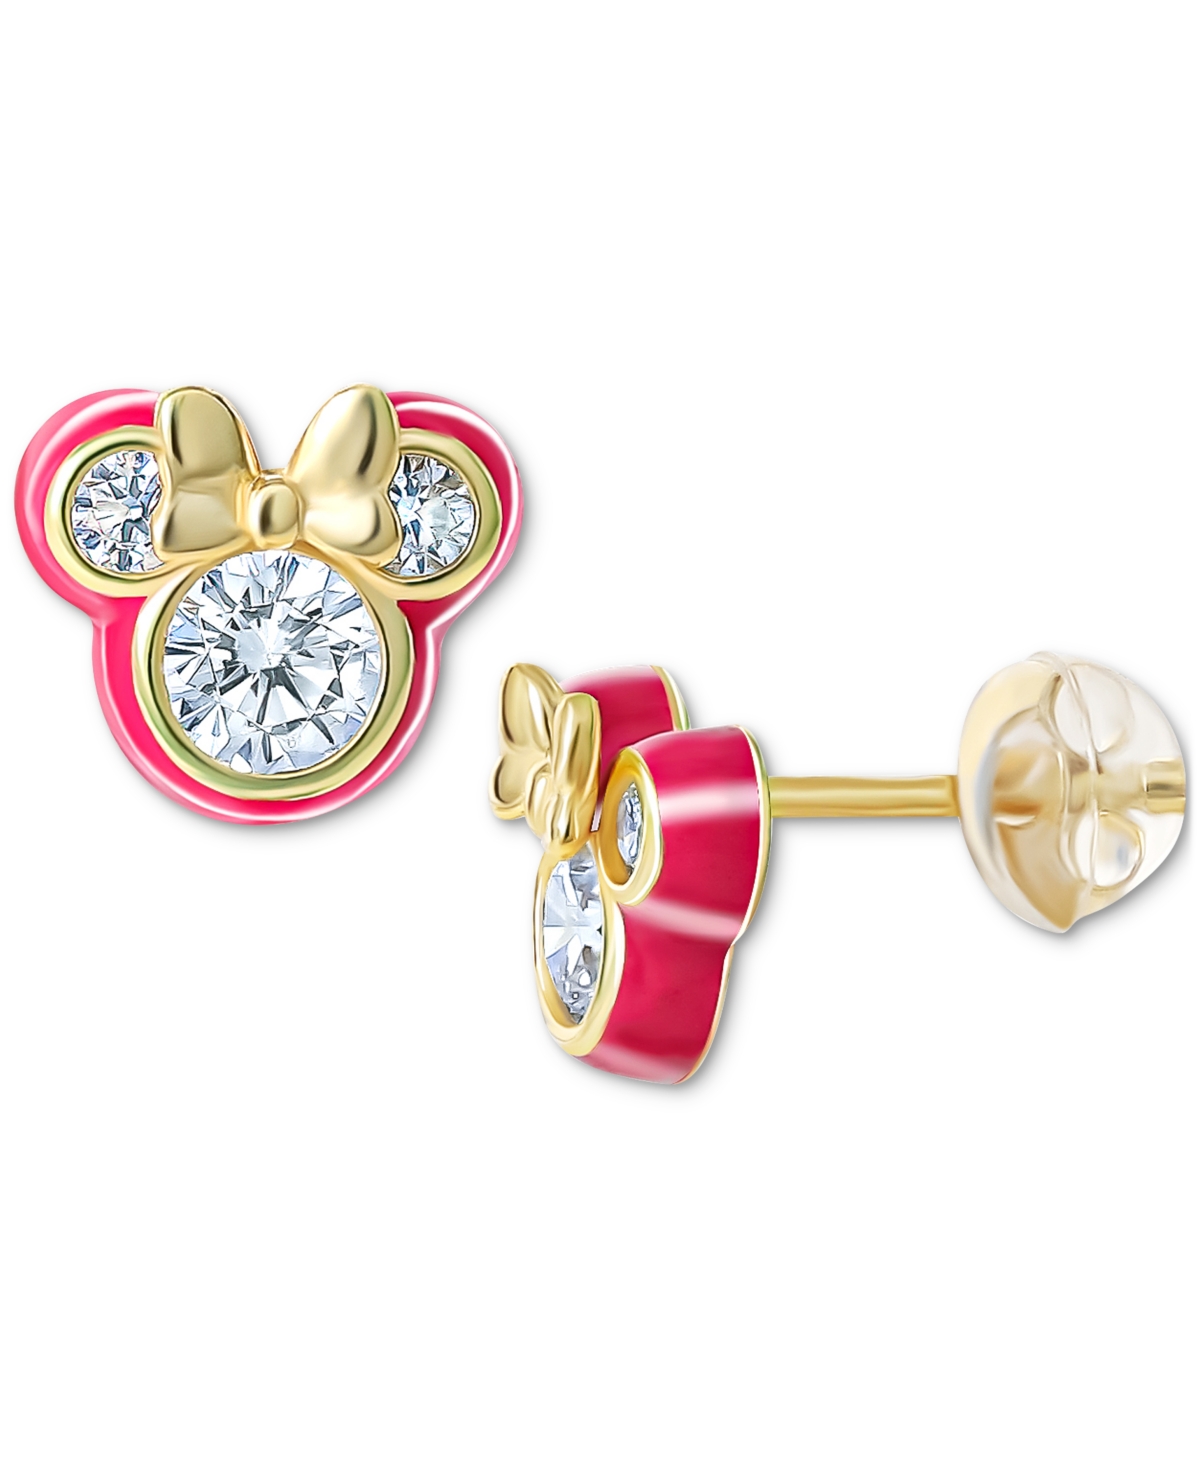 Disney Cubic Zirconia & Deep Pink Enamel Minnie Mouse Stud Earrings In 18k Gold-plated Sterling Silver In Gold Over Silver